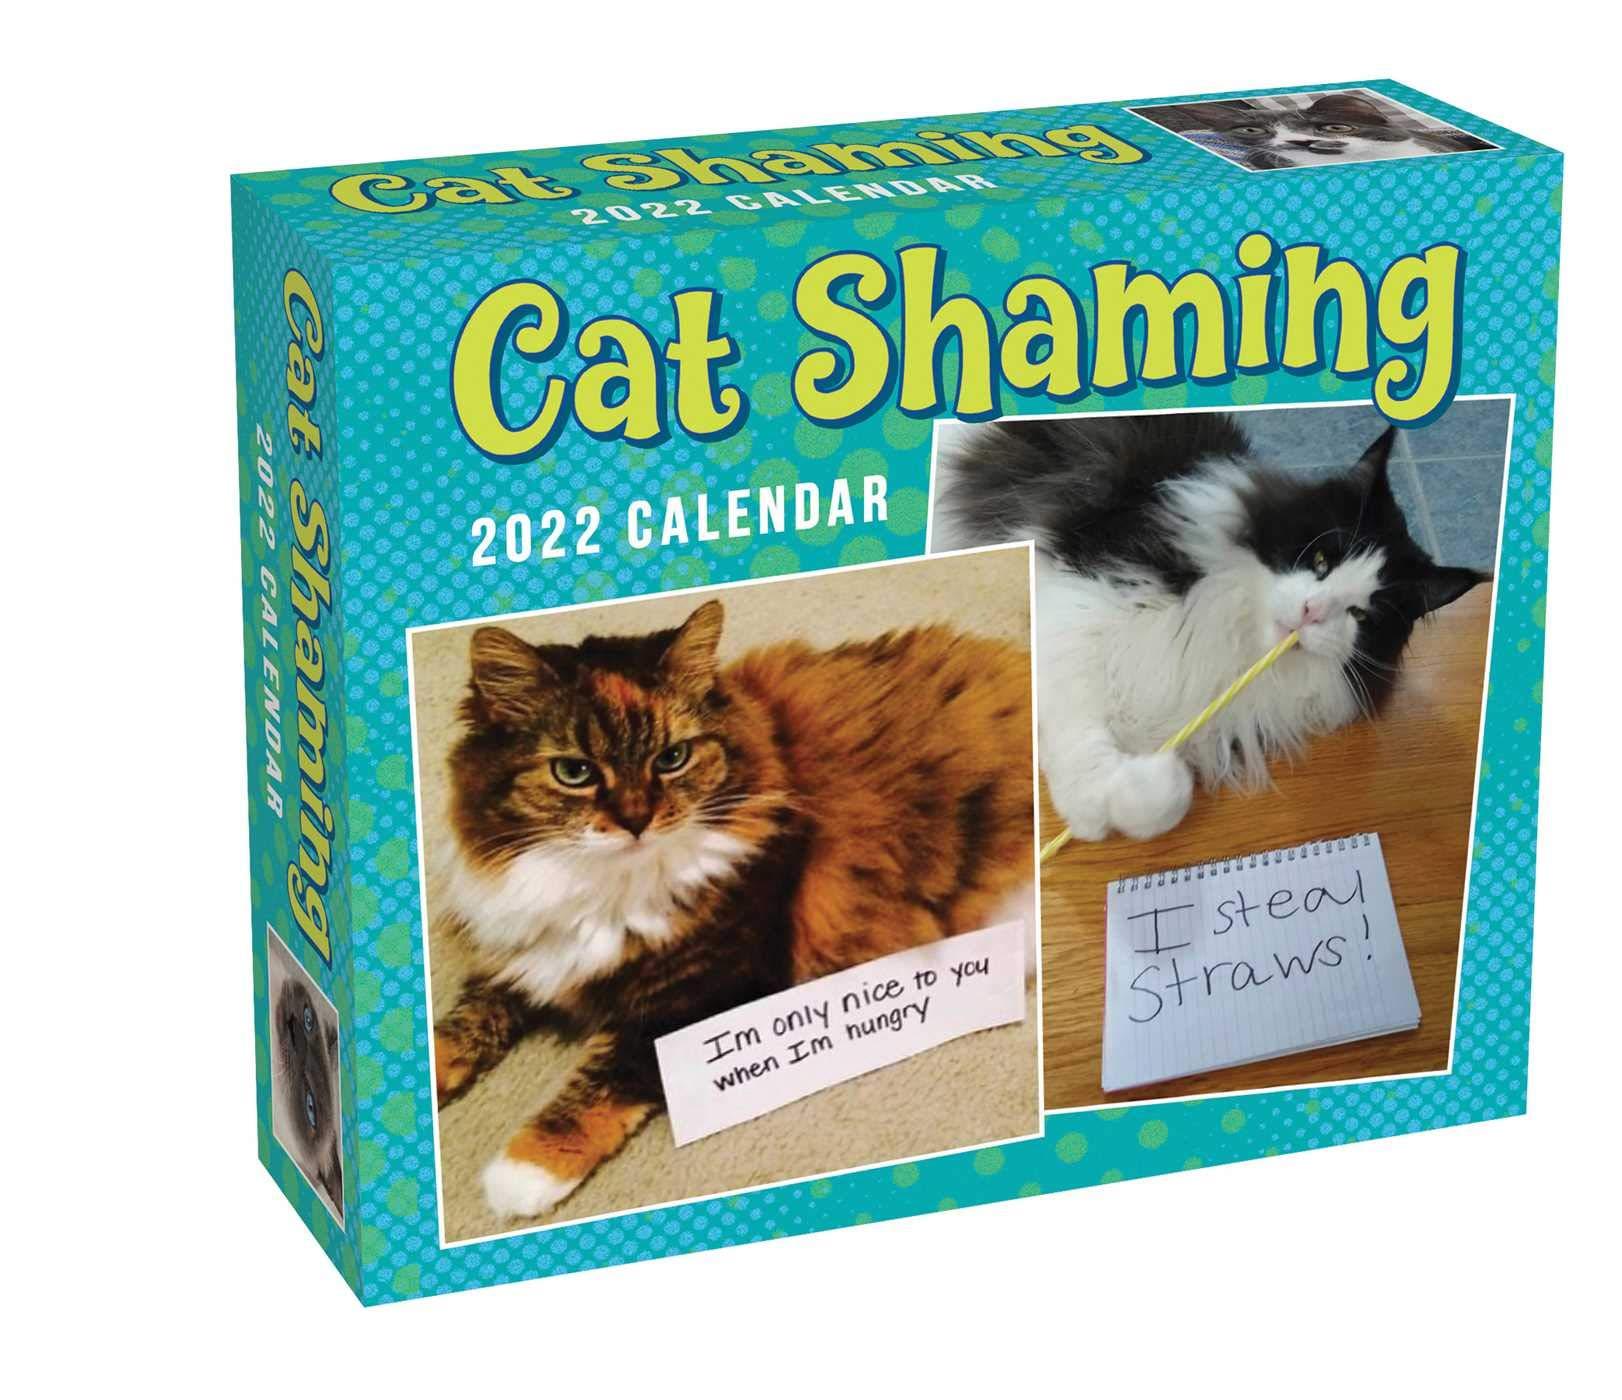 Cat Shaming 2022 Day-to-Day Calendar for $7.99